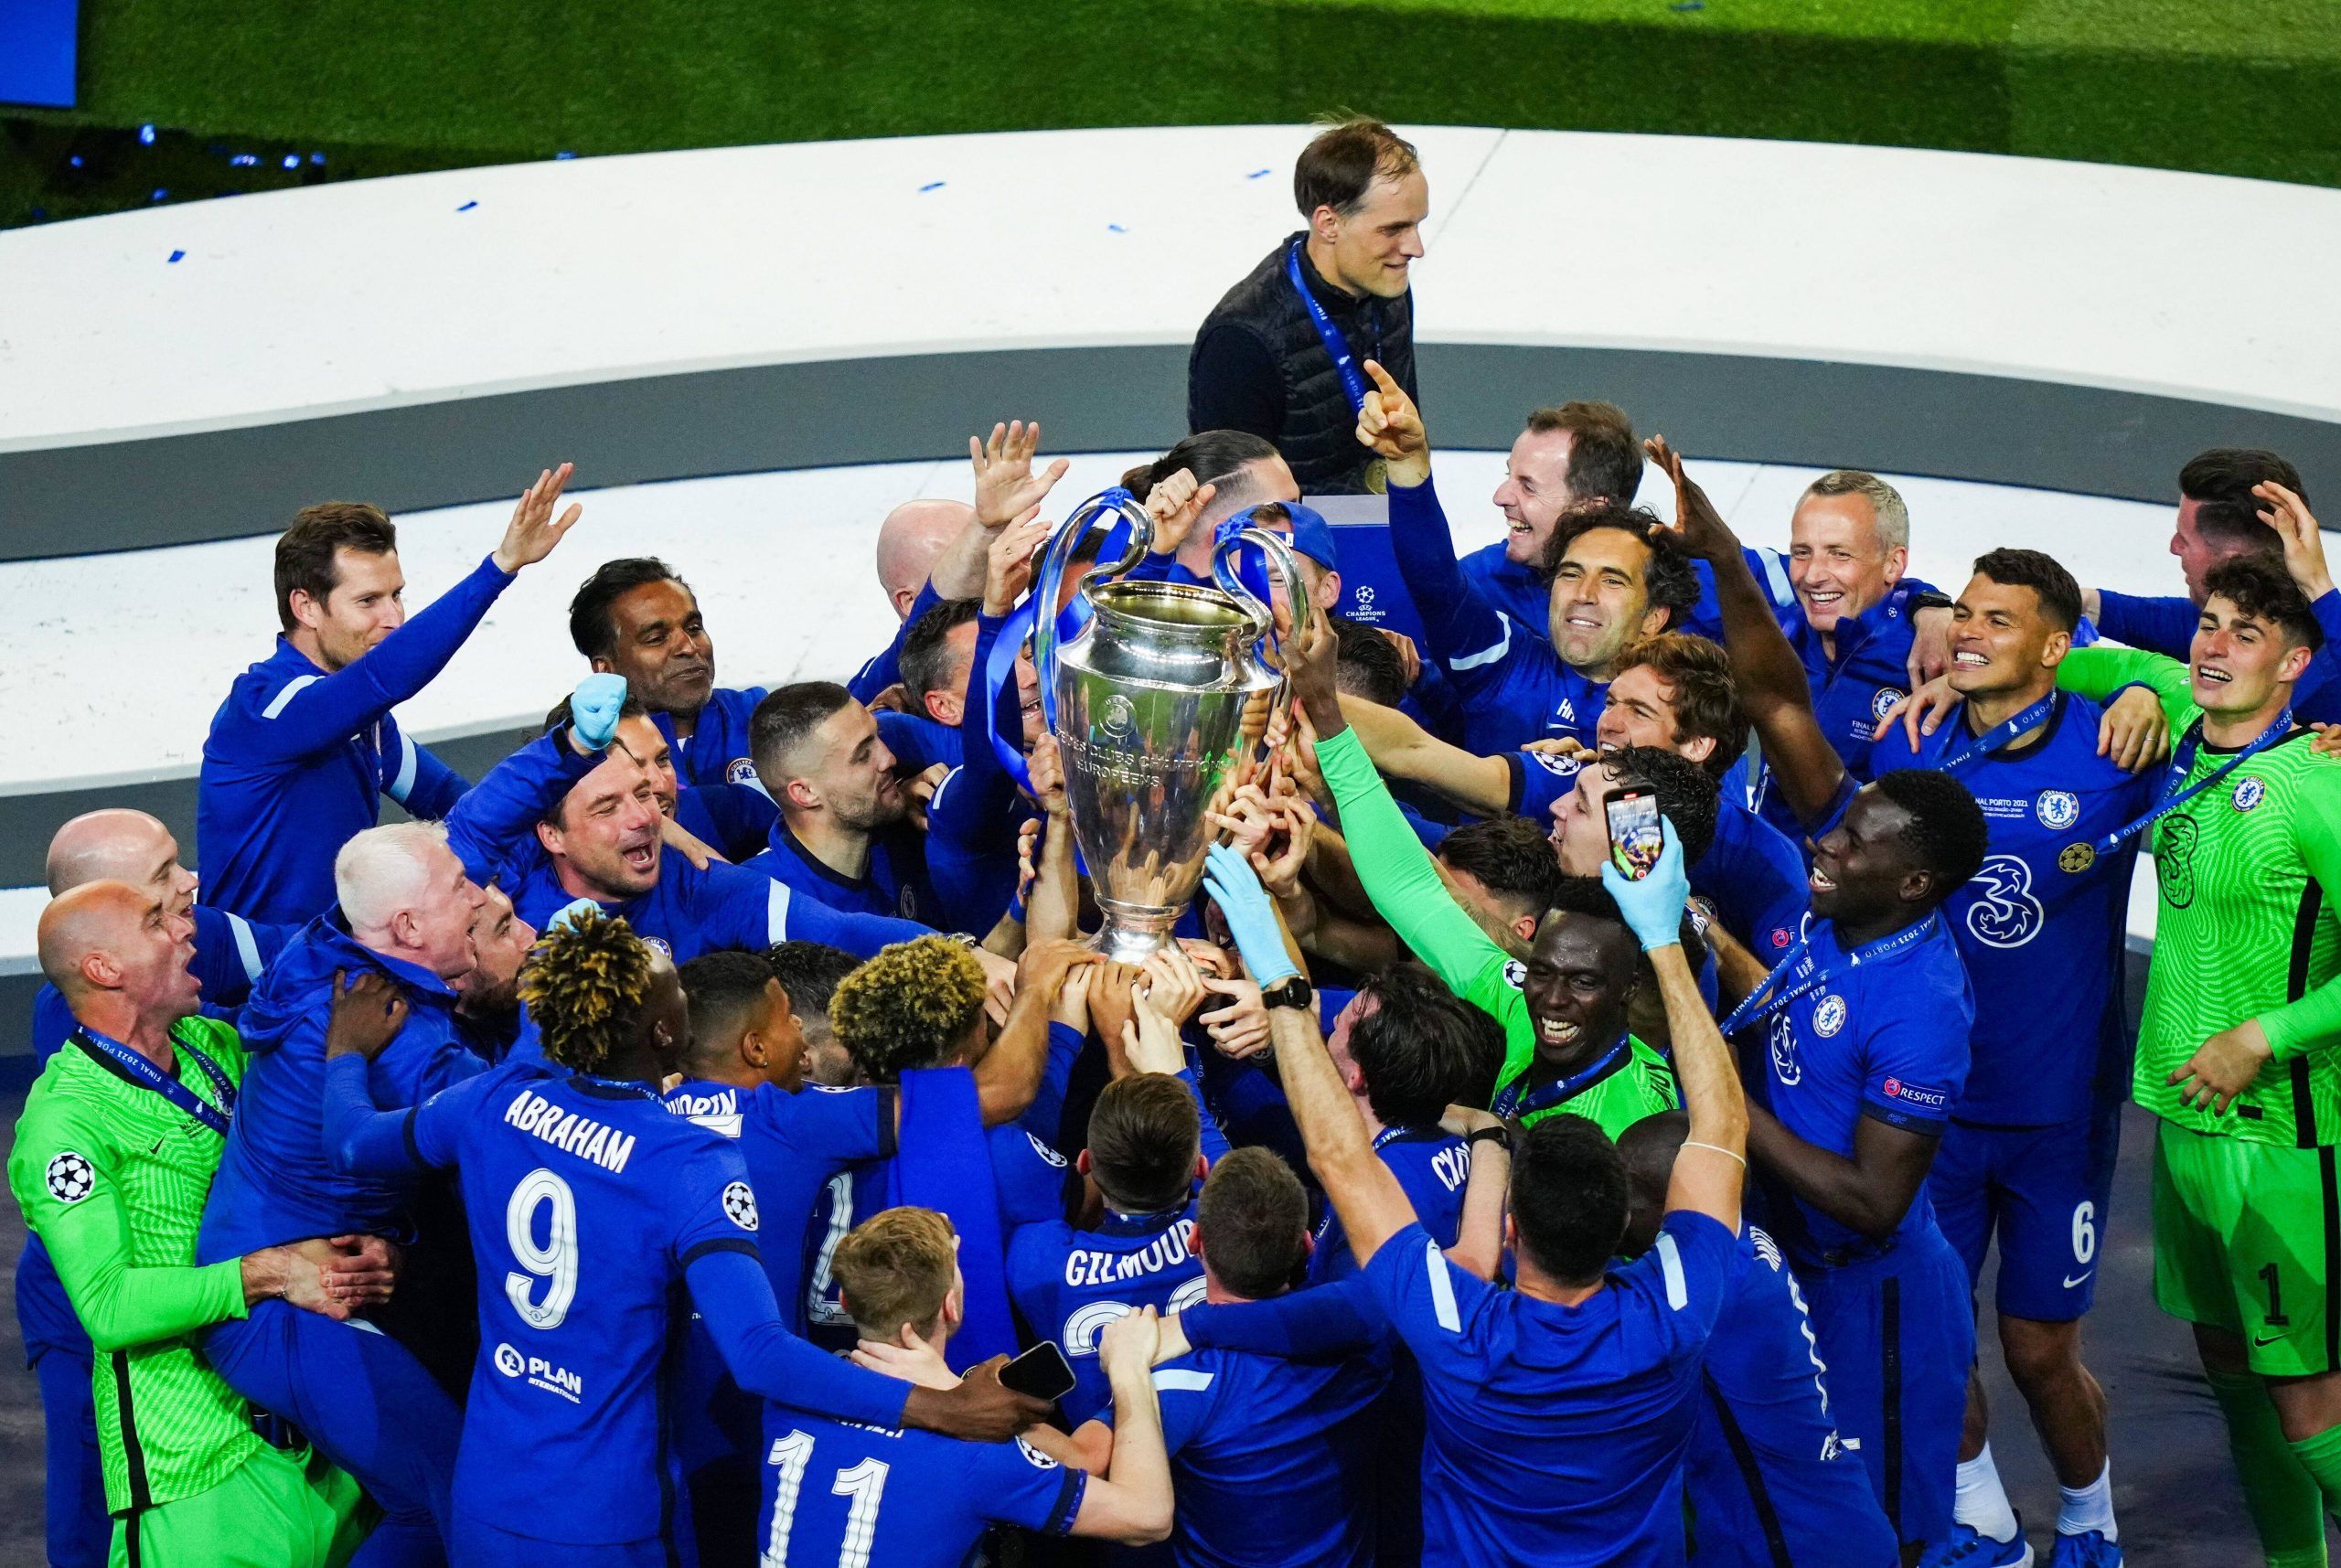 Revealed: The prize money won by Chelsea after UCL win vs Man City